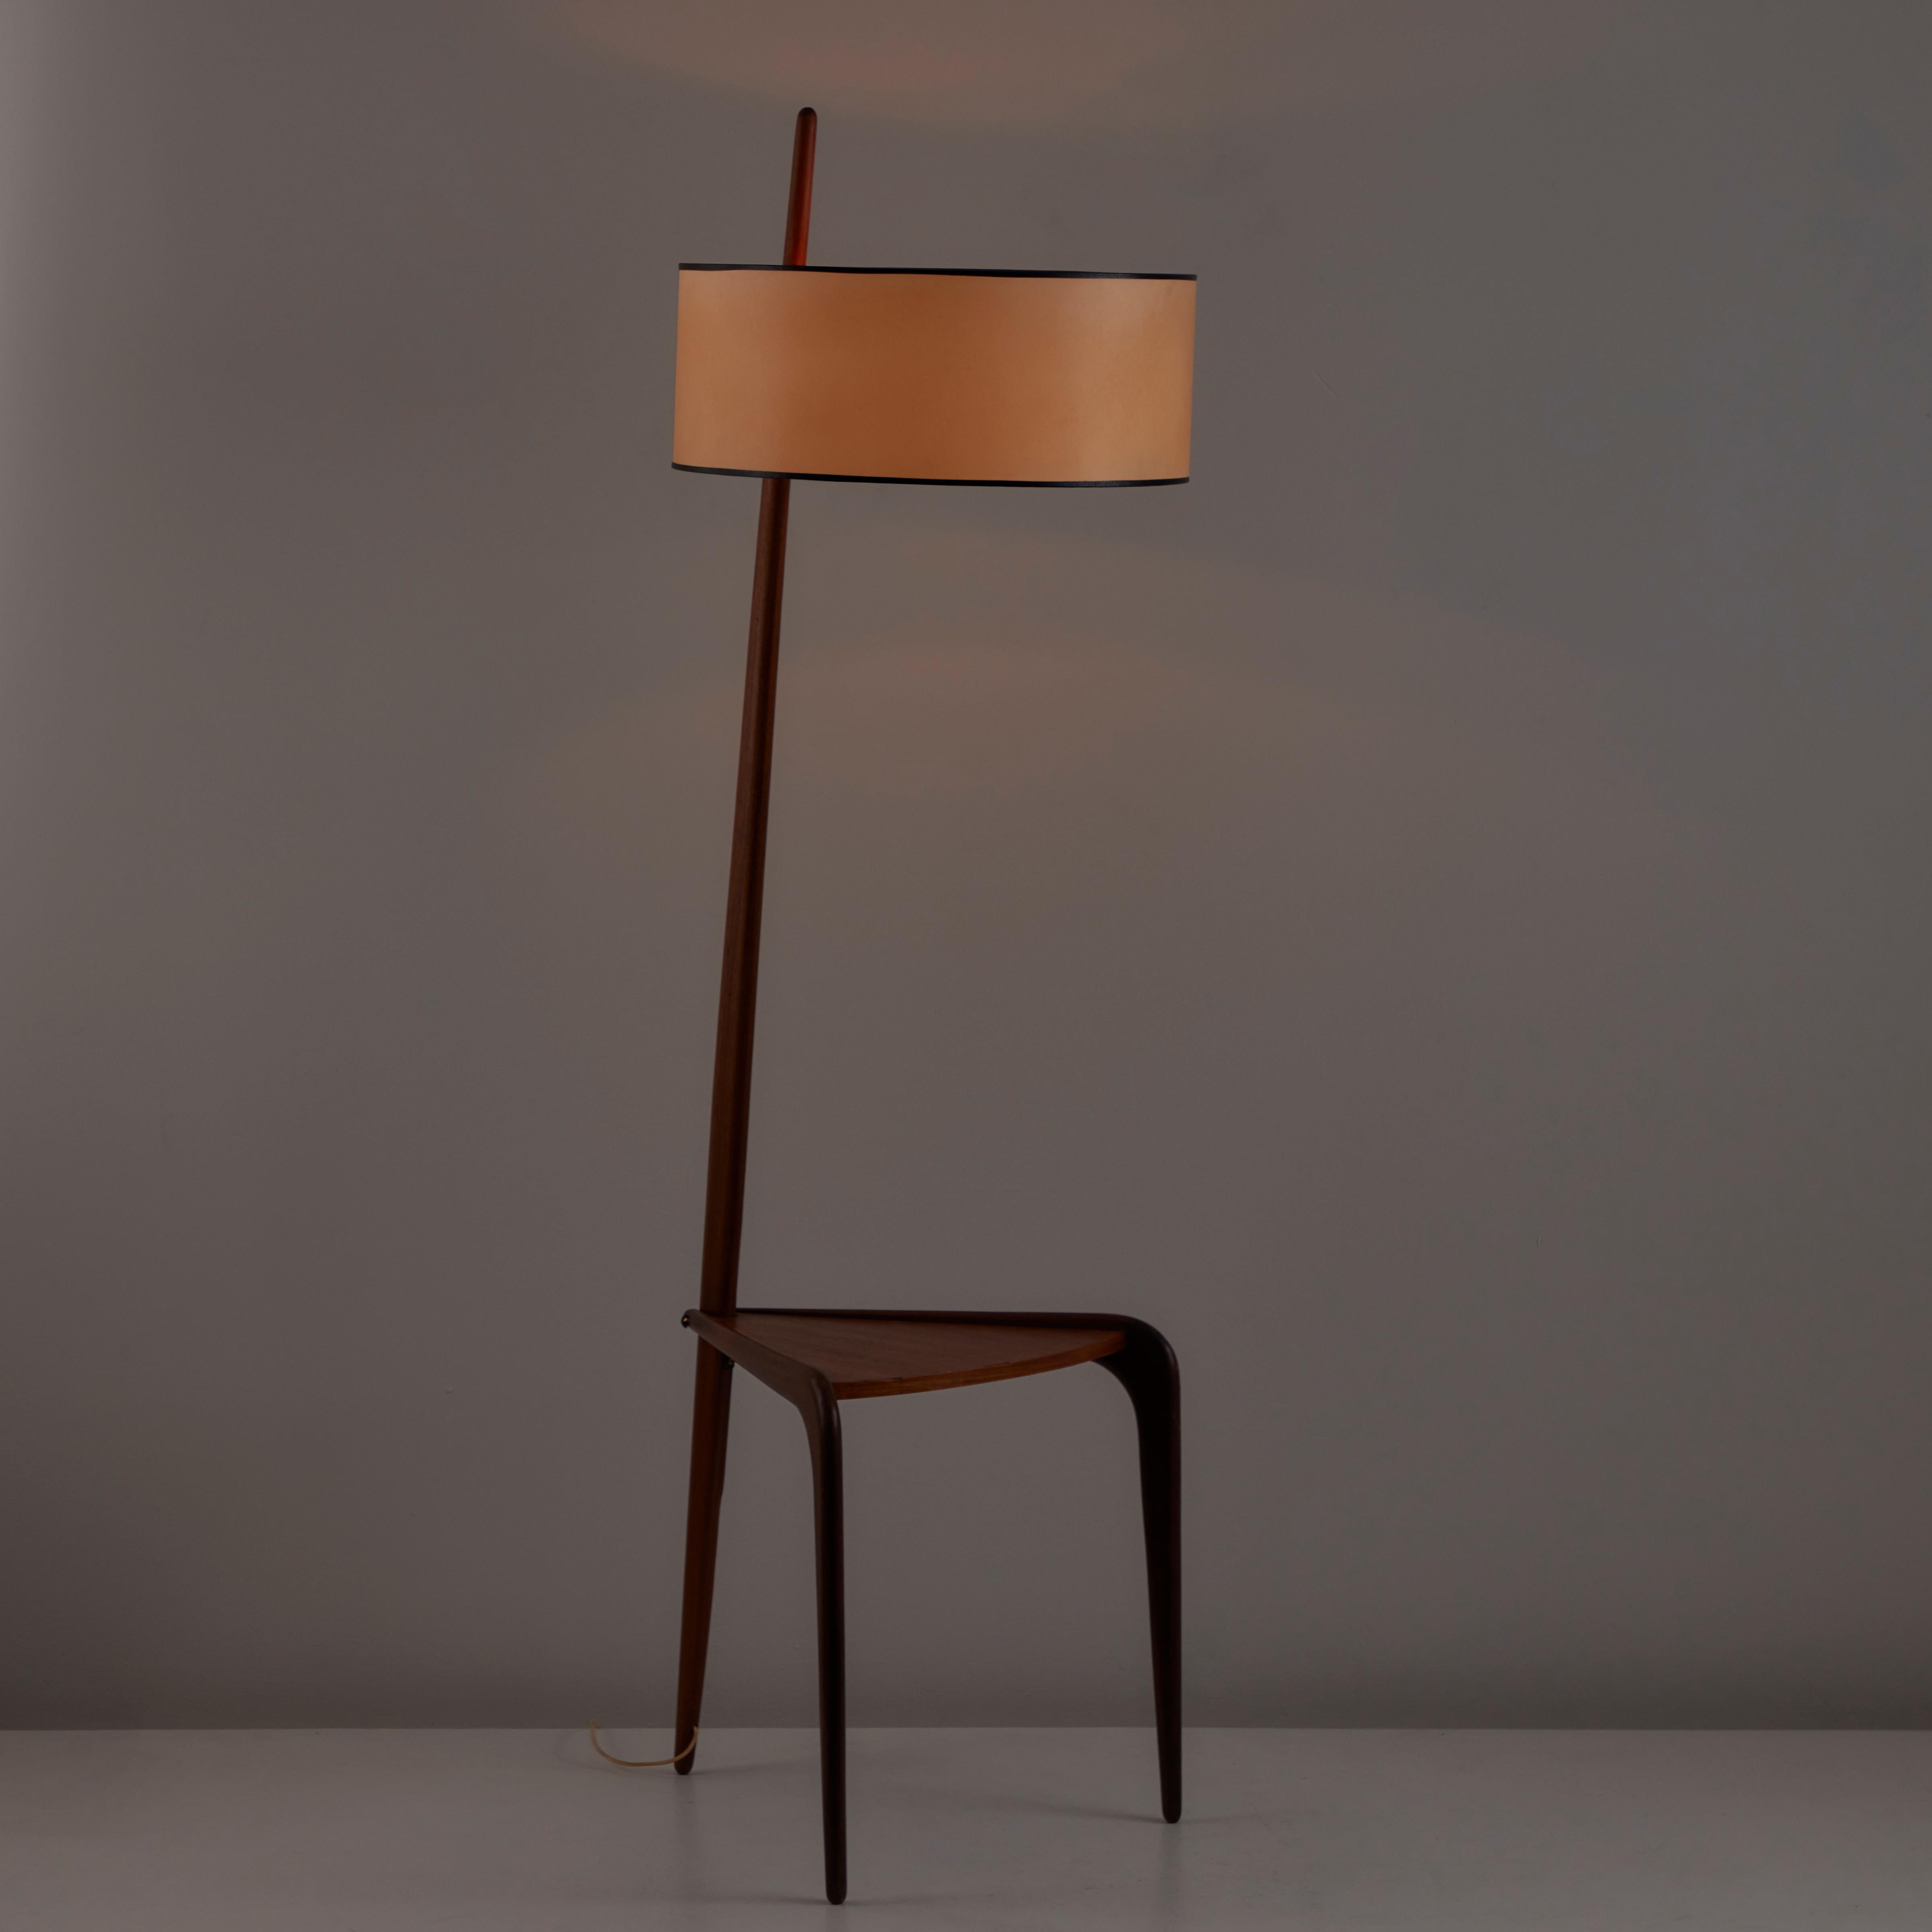 Model 167.A82 Floor Lamp by Rispal. Designed and manufactured in France, circa 1950. Rare floor lamp featuring a soft wooden frame, parchment shade, and a three legged base and end table surface seamlessly included in the frame. This lamp holds two